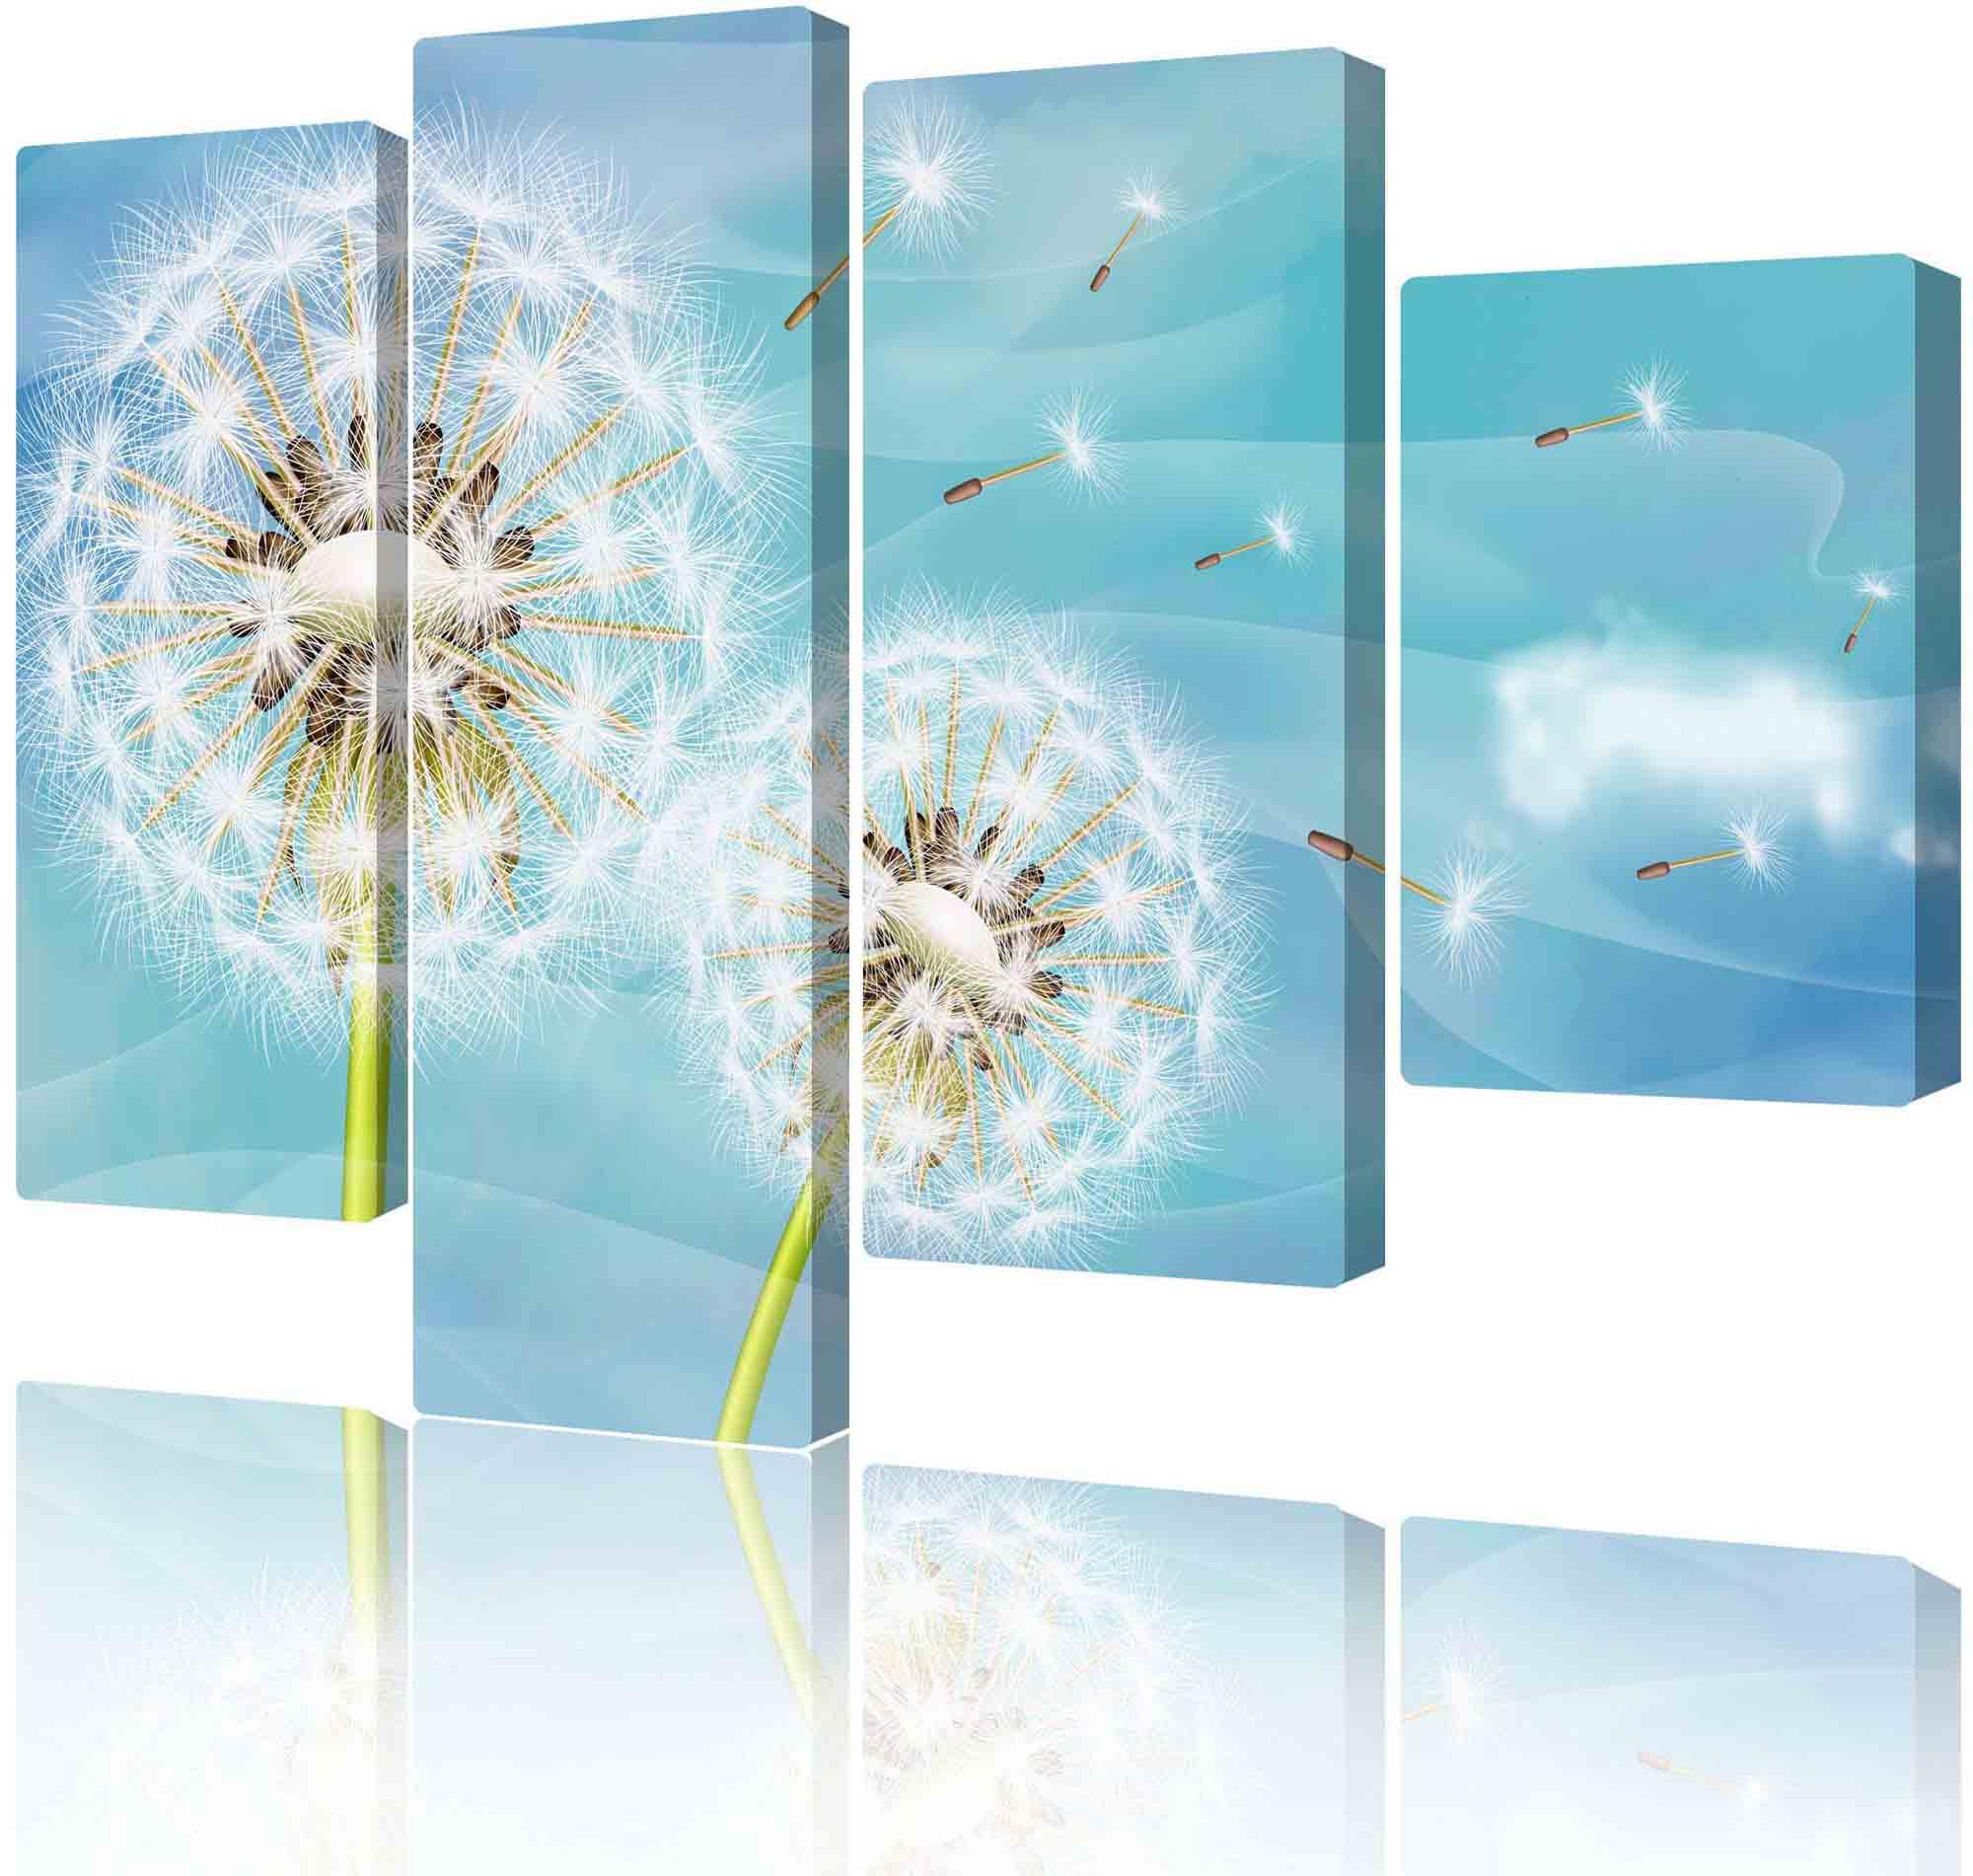 Modular picture - dandelions against the sky